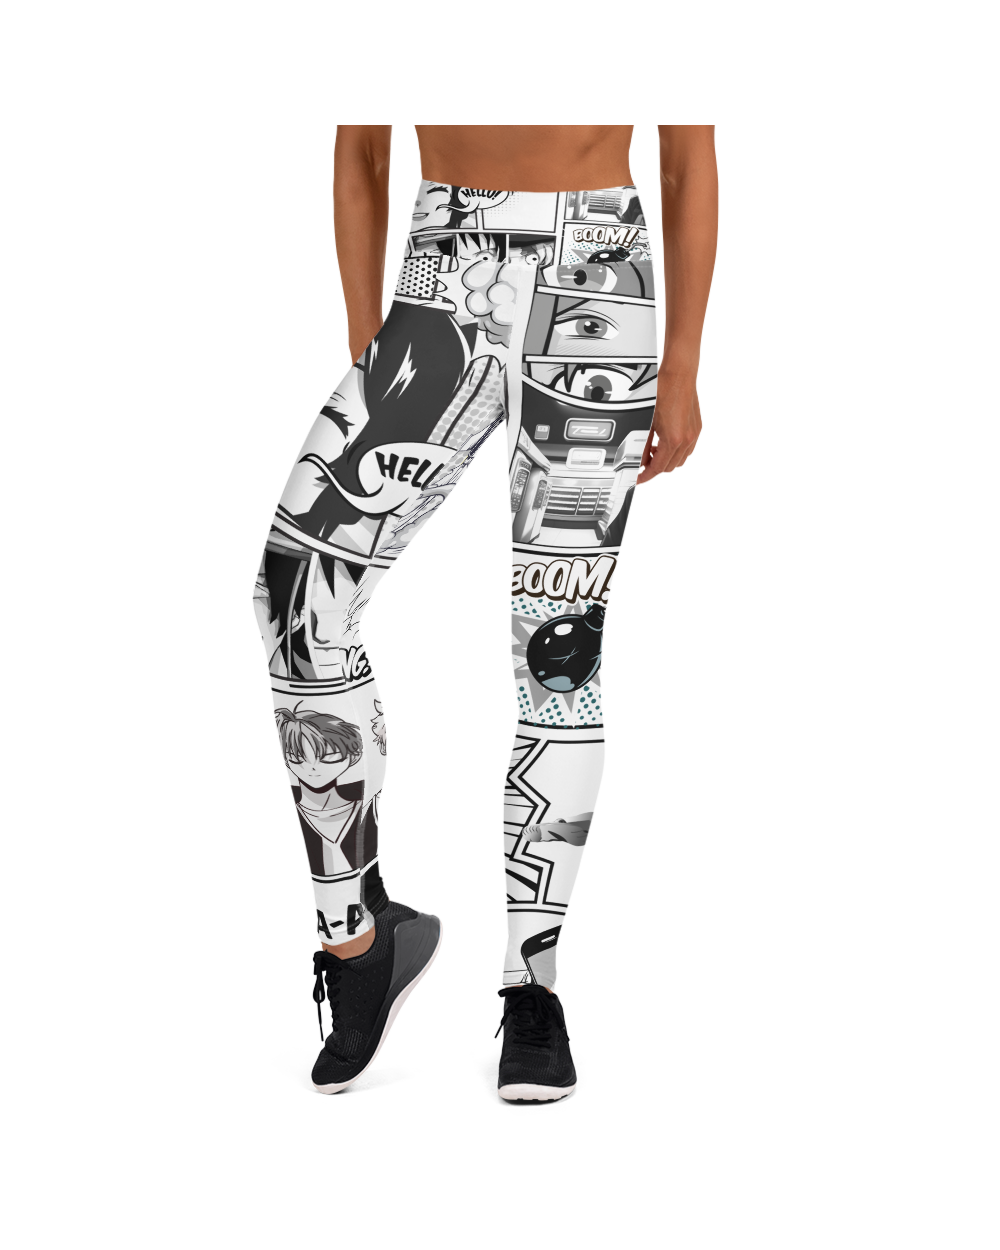 Black & White Camo Capris From GEARBUNCH!